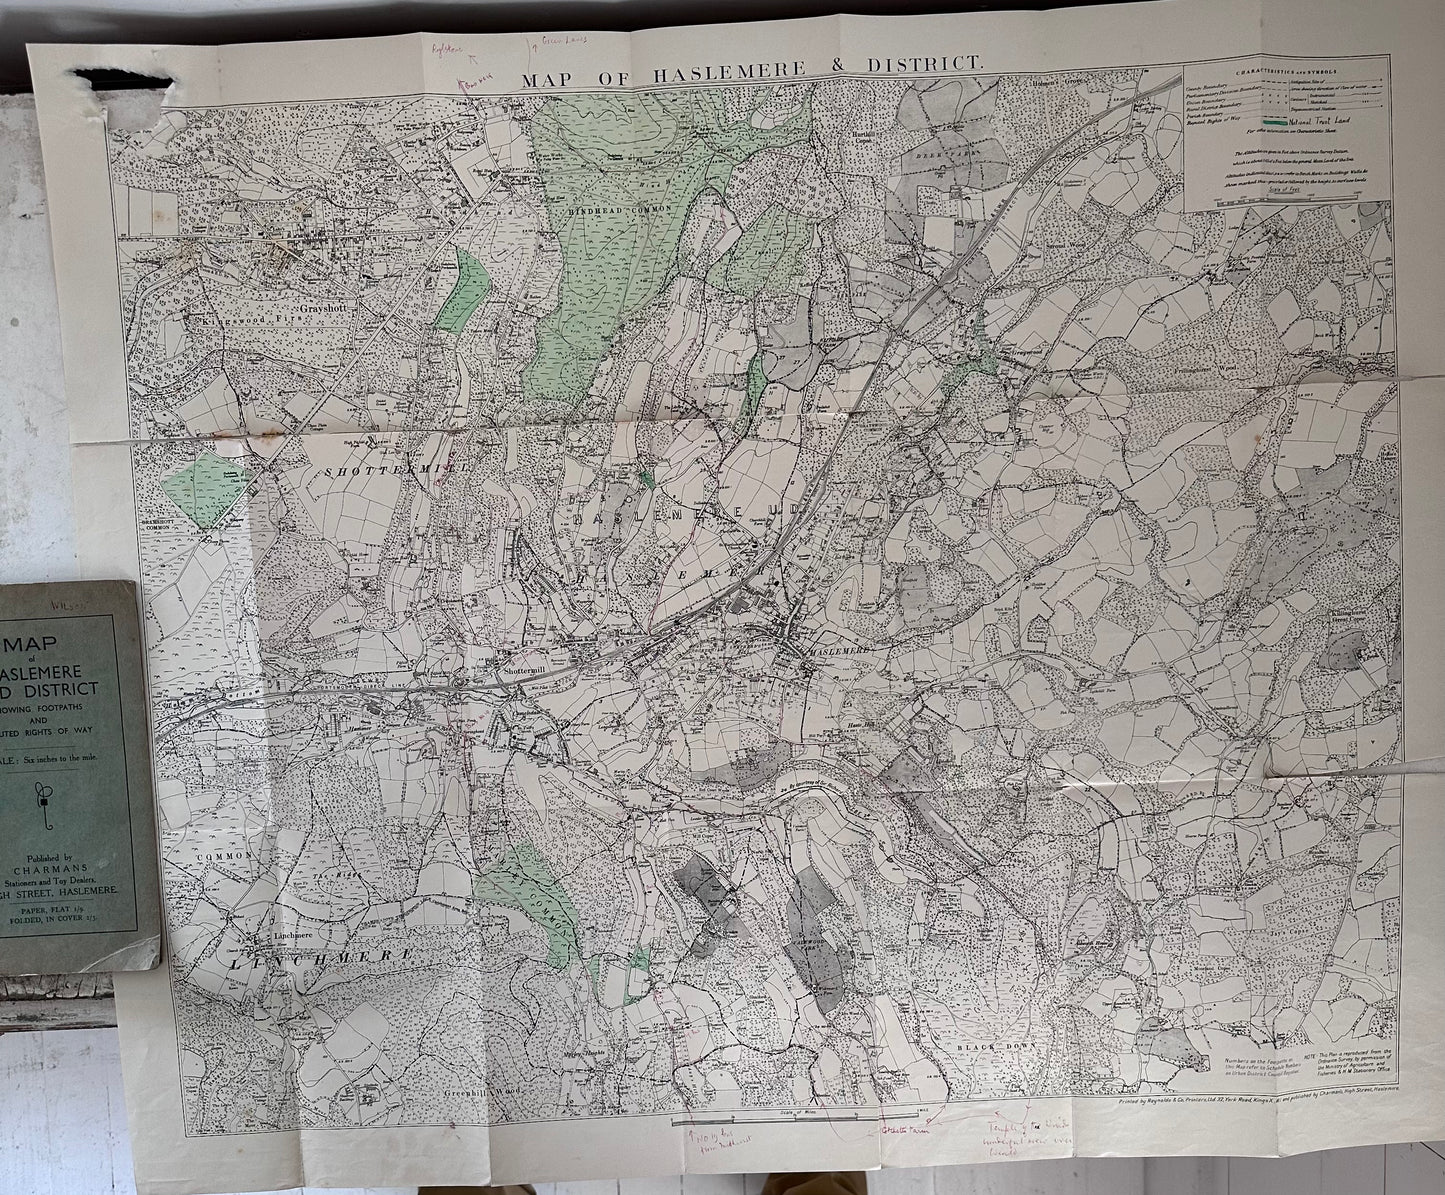 Map of Halesmere & District top 1/3 of map is torn off printed on paper